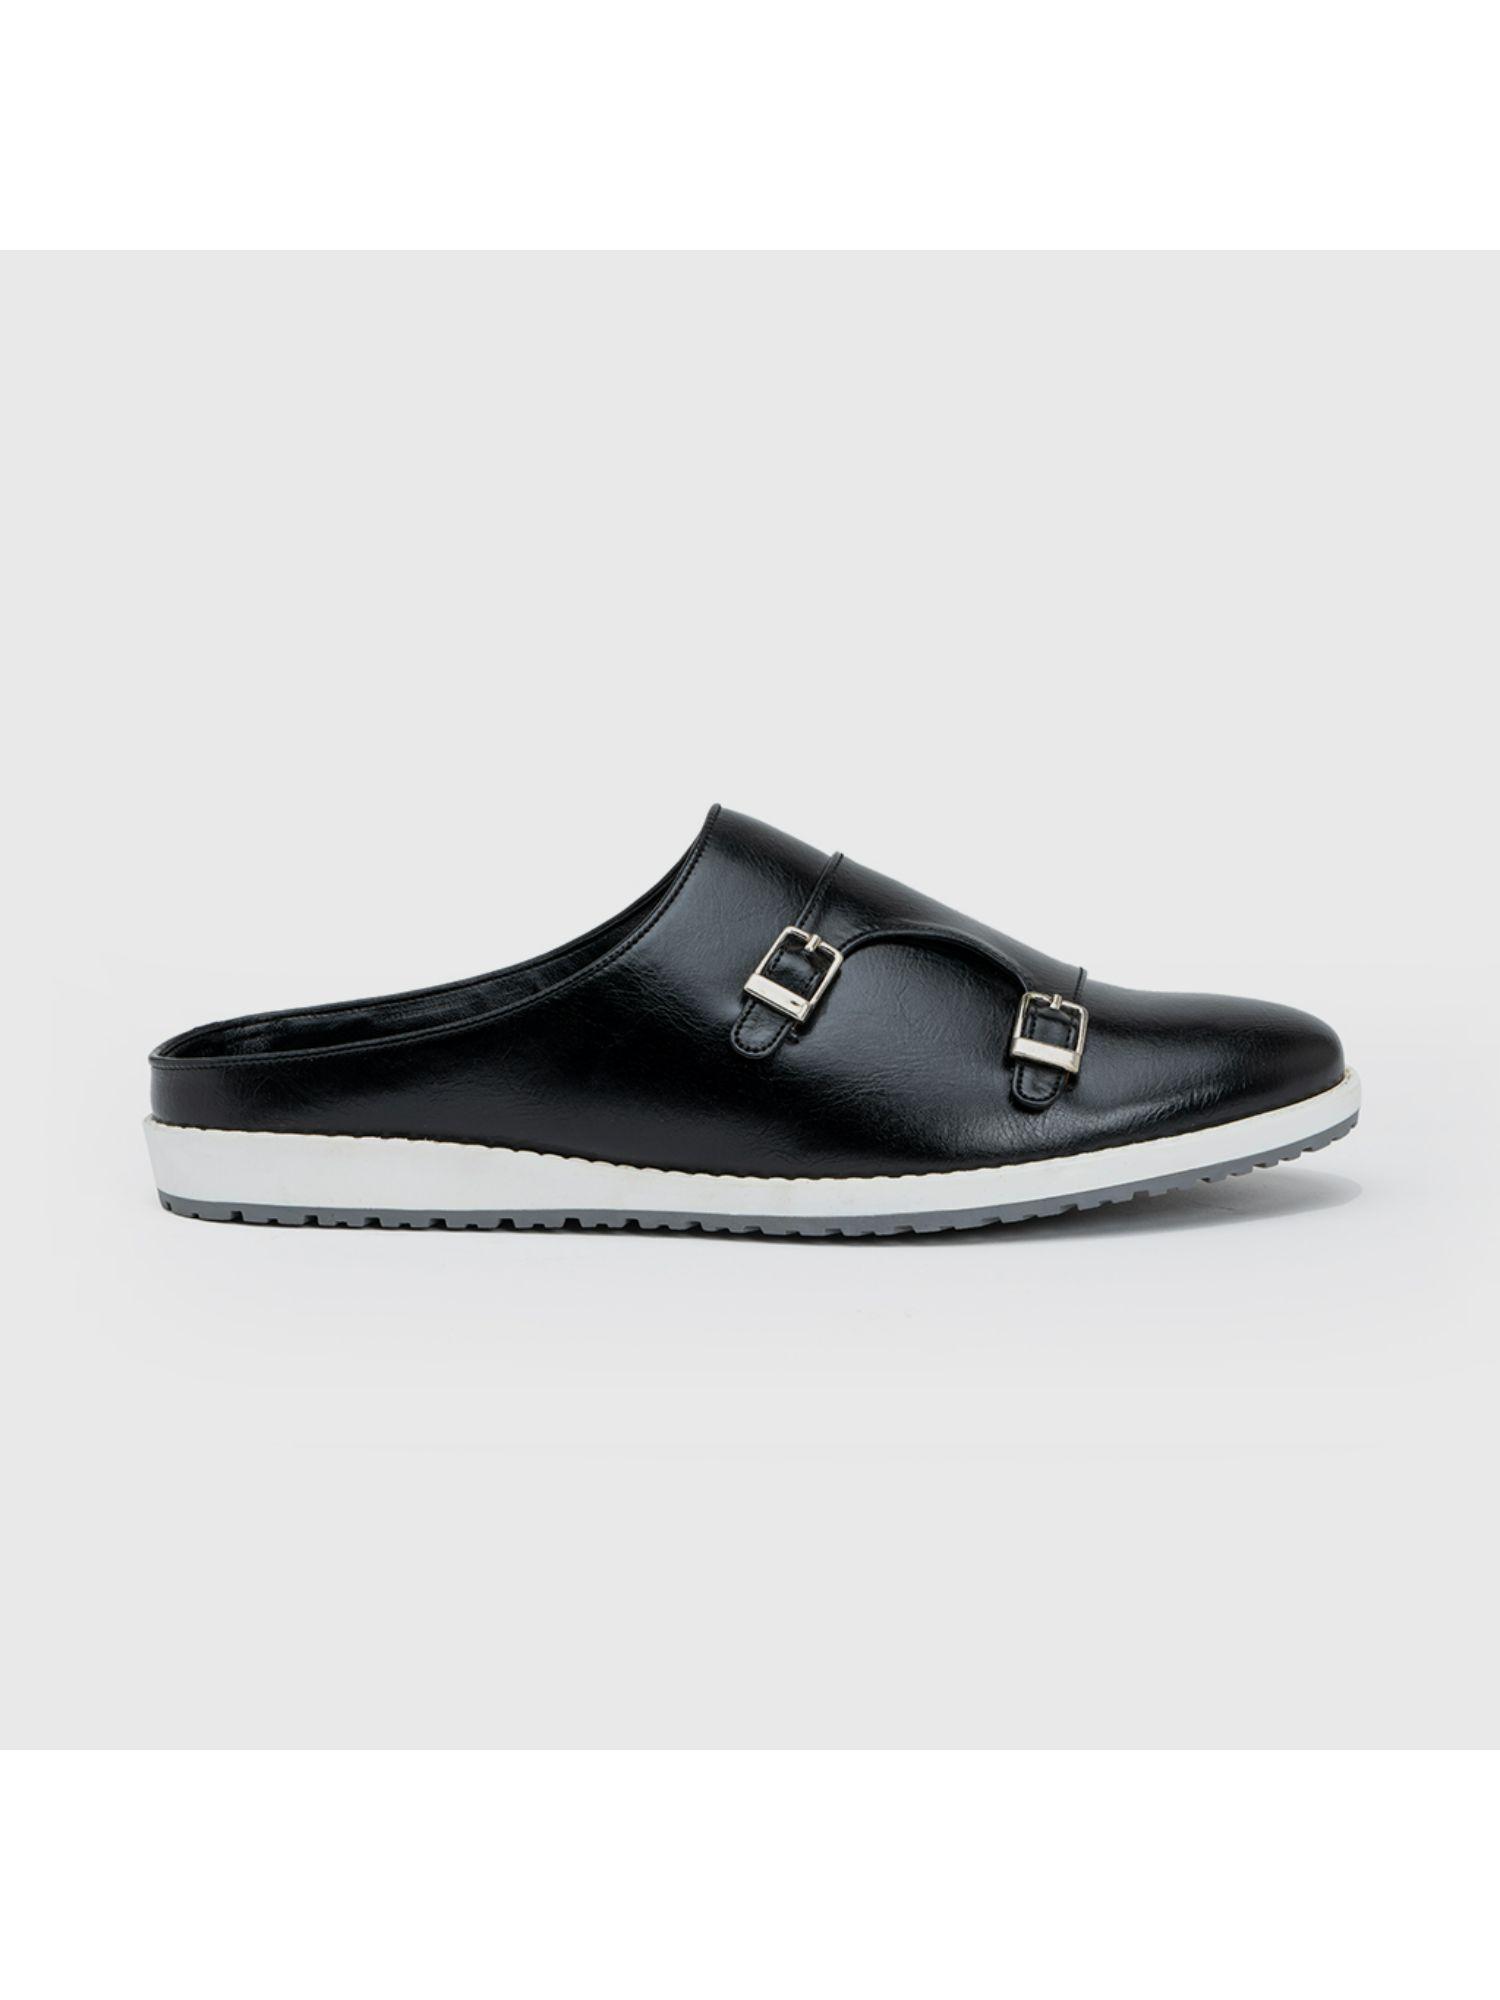 solid black monk strap mules